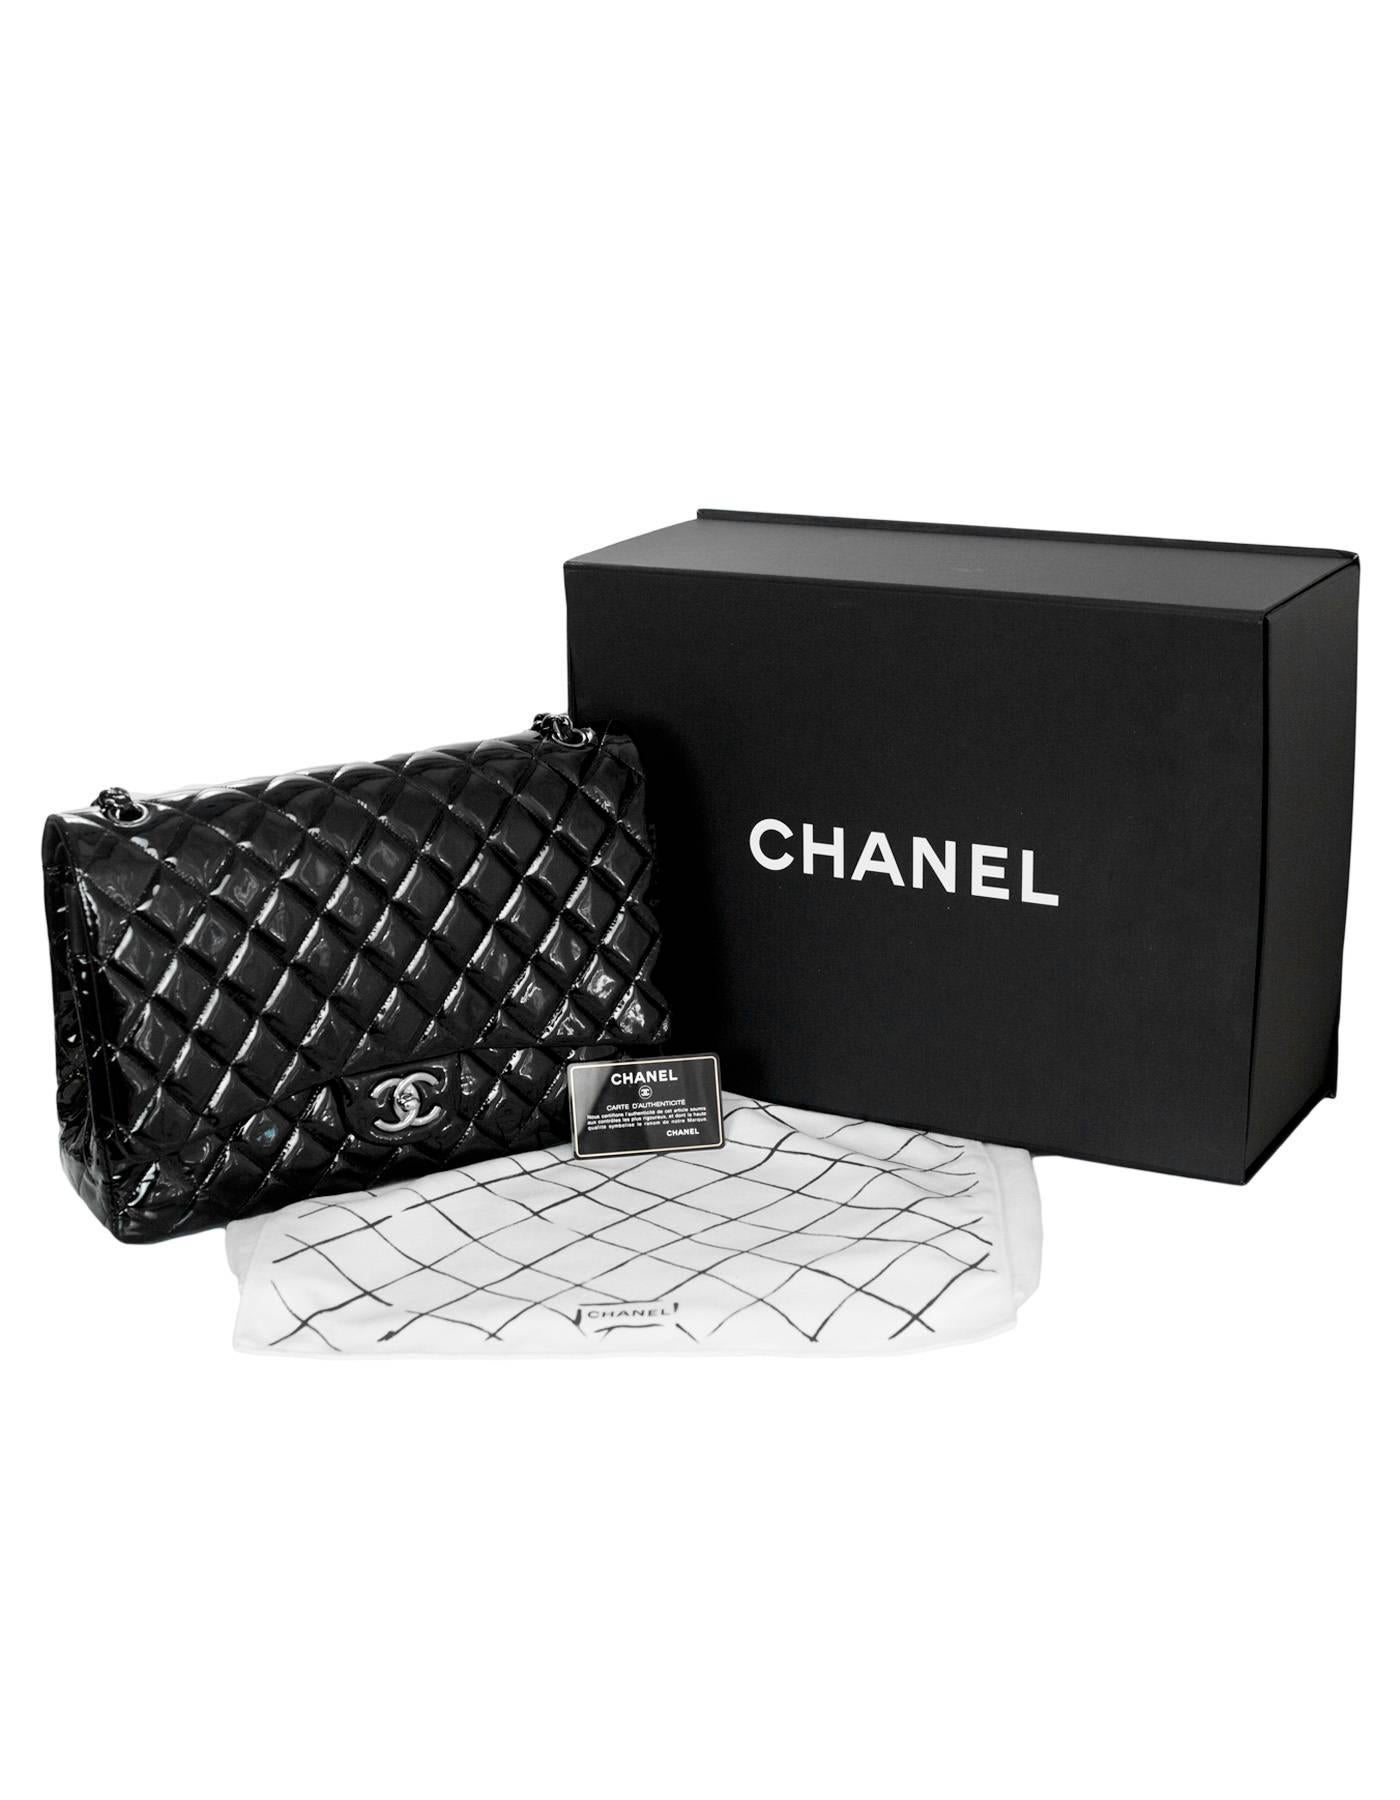 Chanel Black Quilted Patent Leather Double Flap Classic Maxi Bag 6